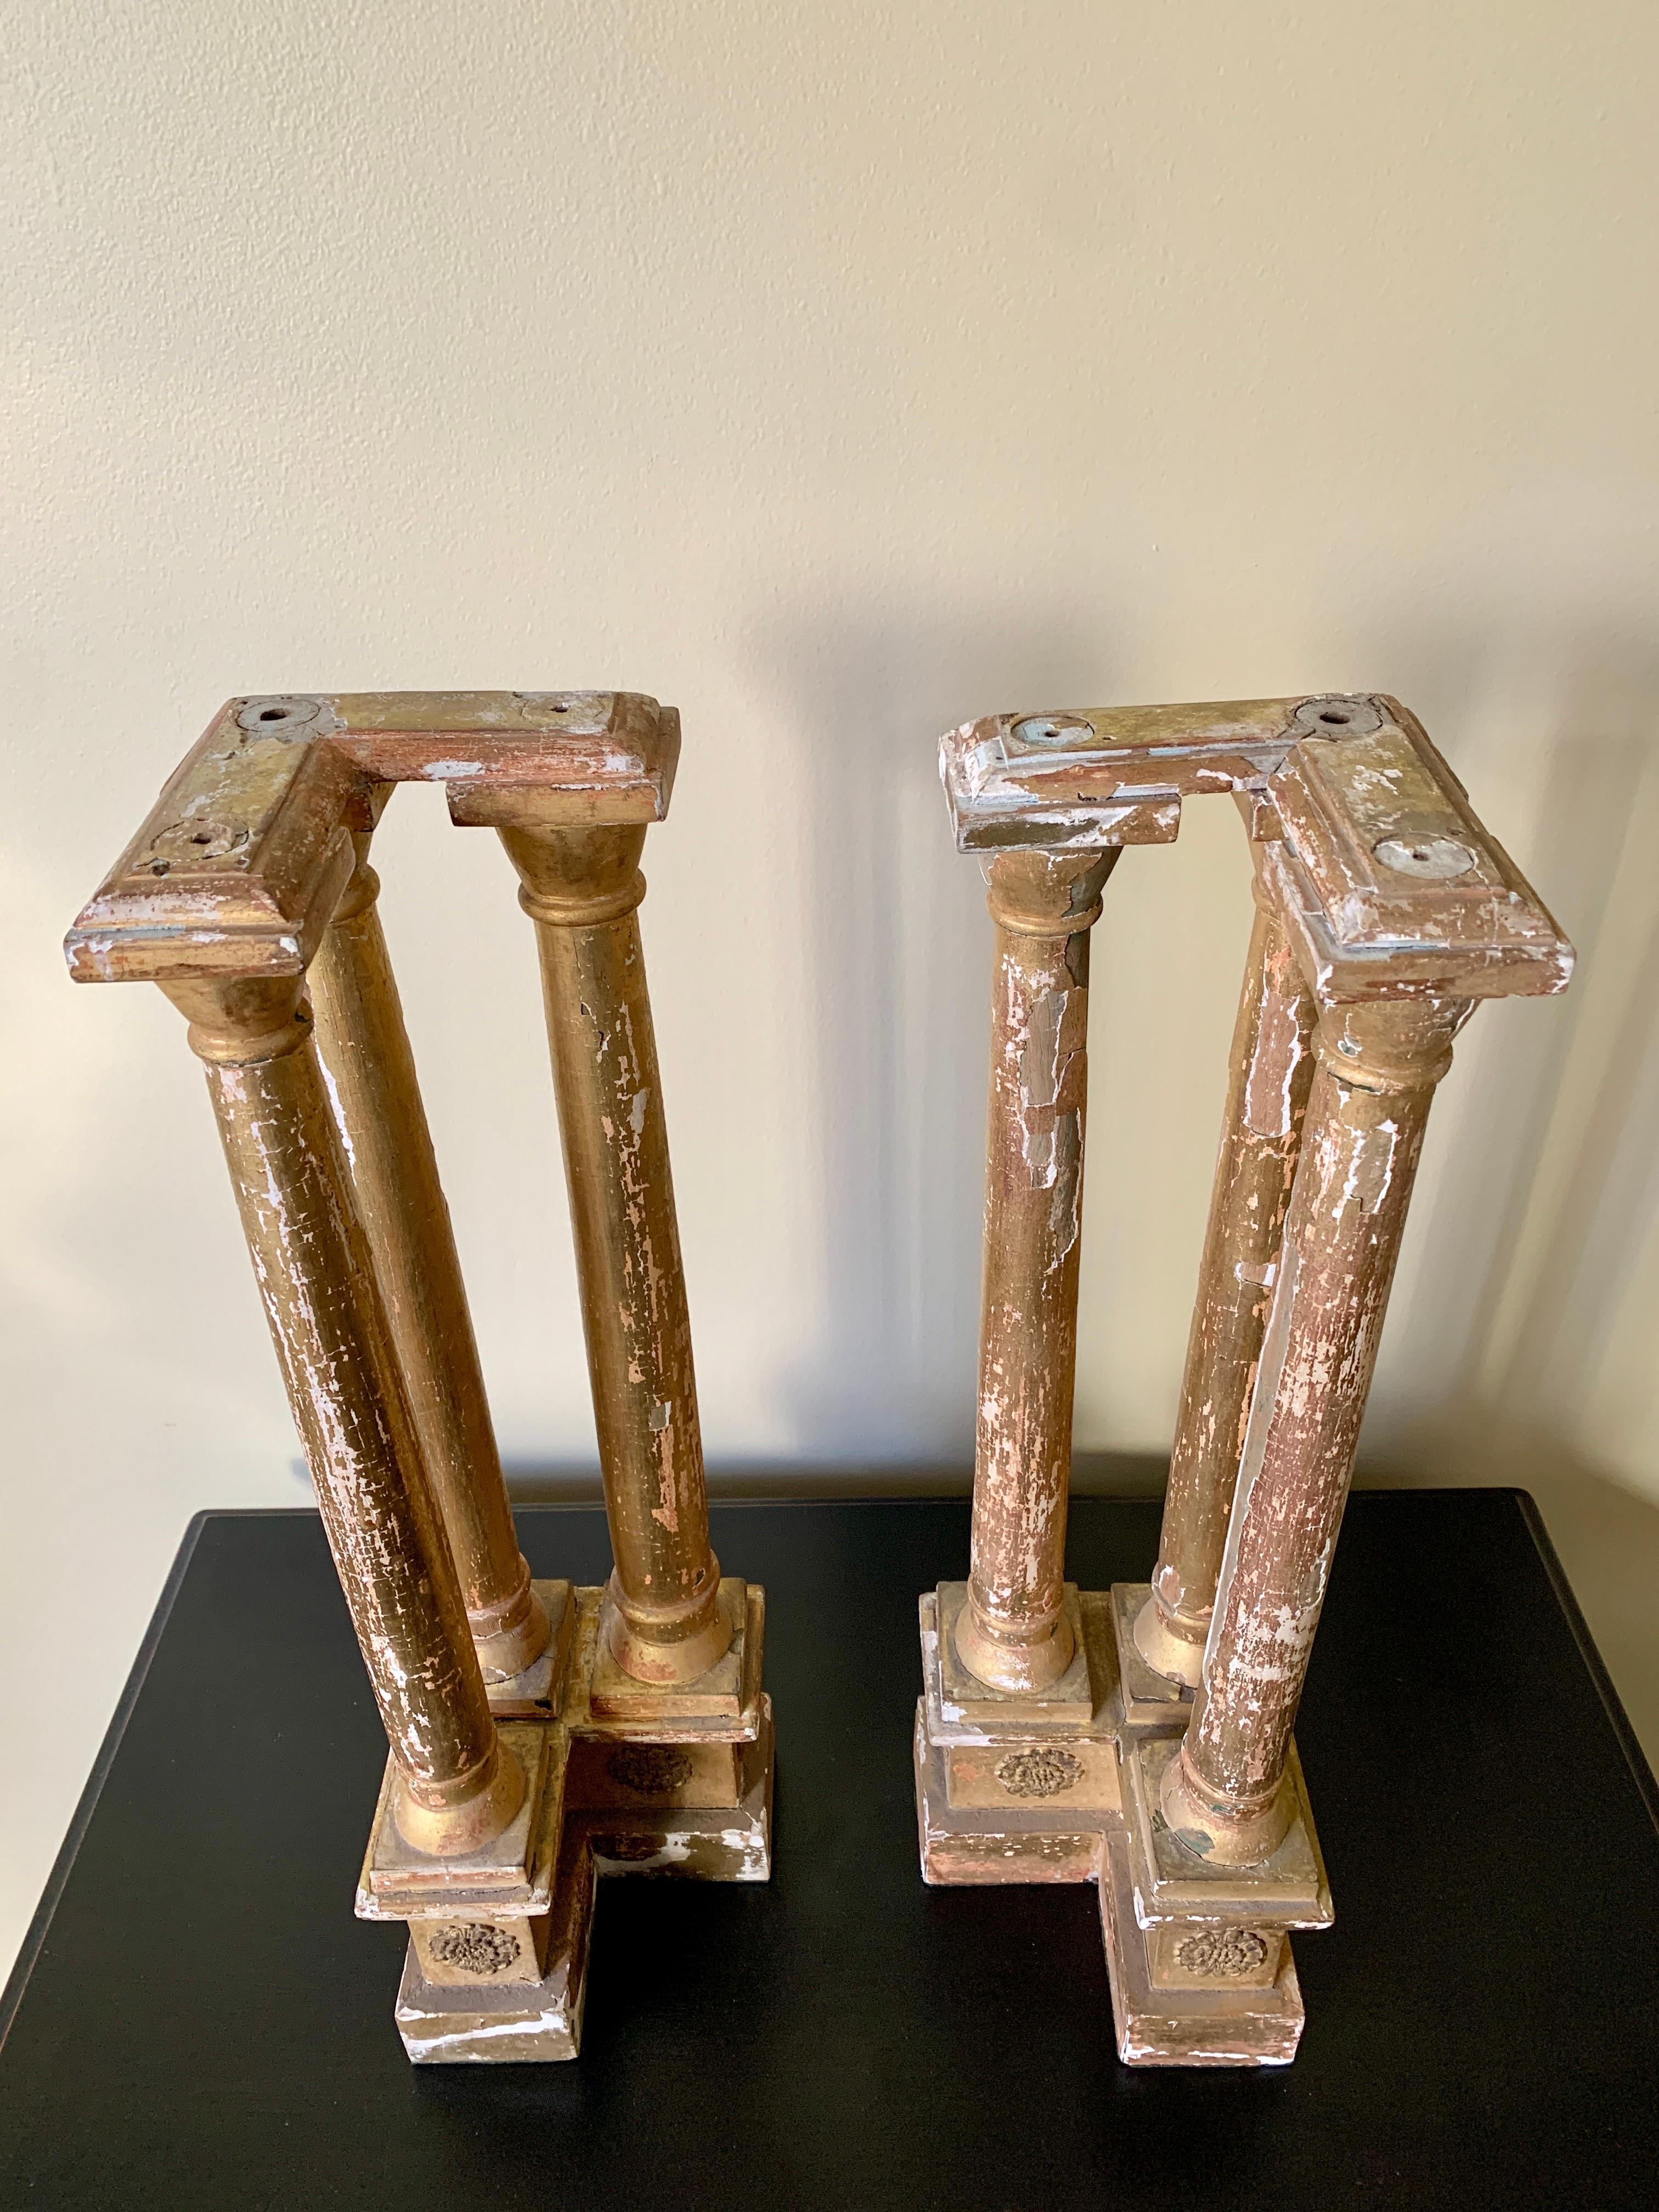 Antique Neoclassical Grand Tour Giltwood Architectural Columns, a Pair For Sale 2